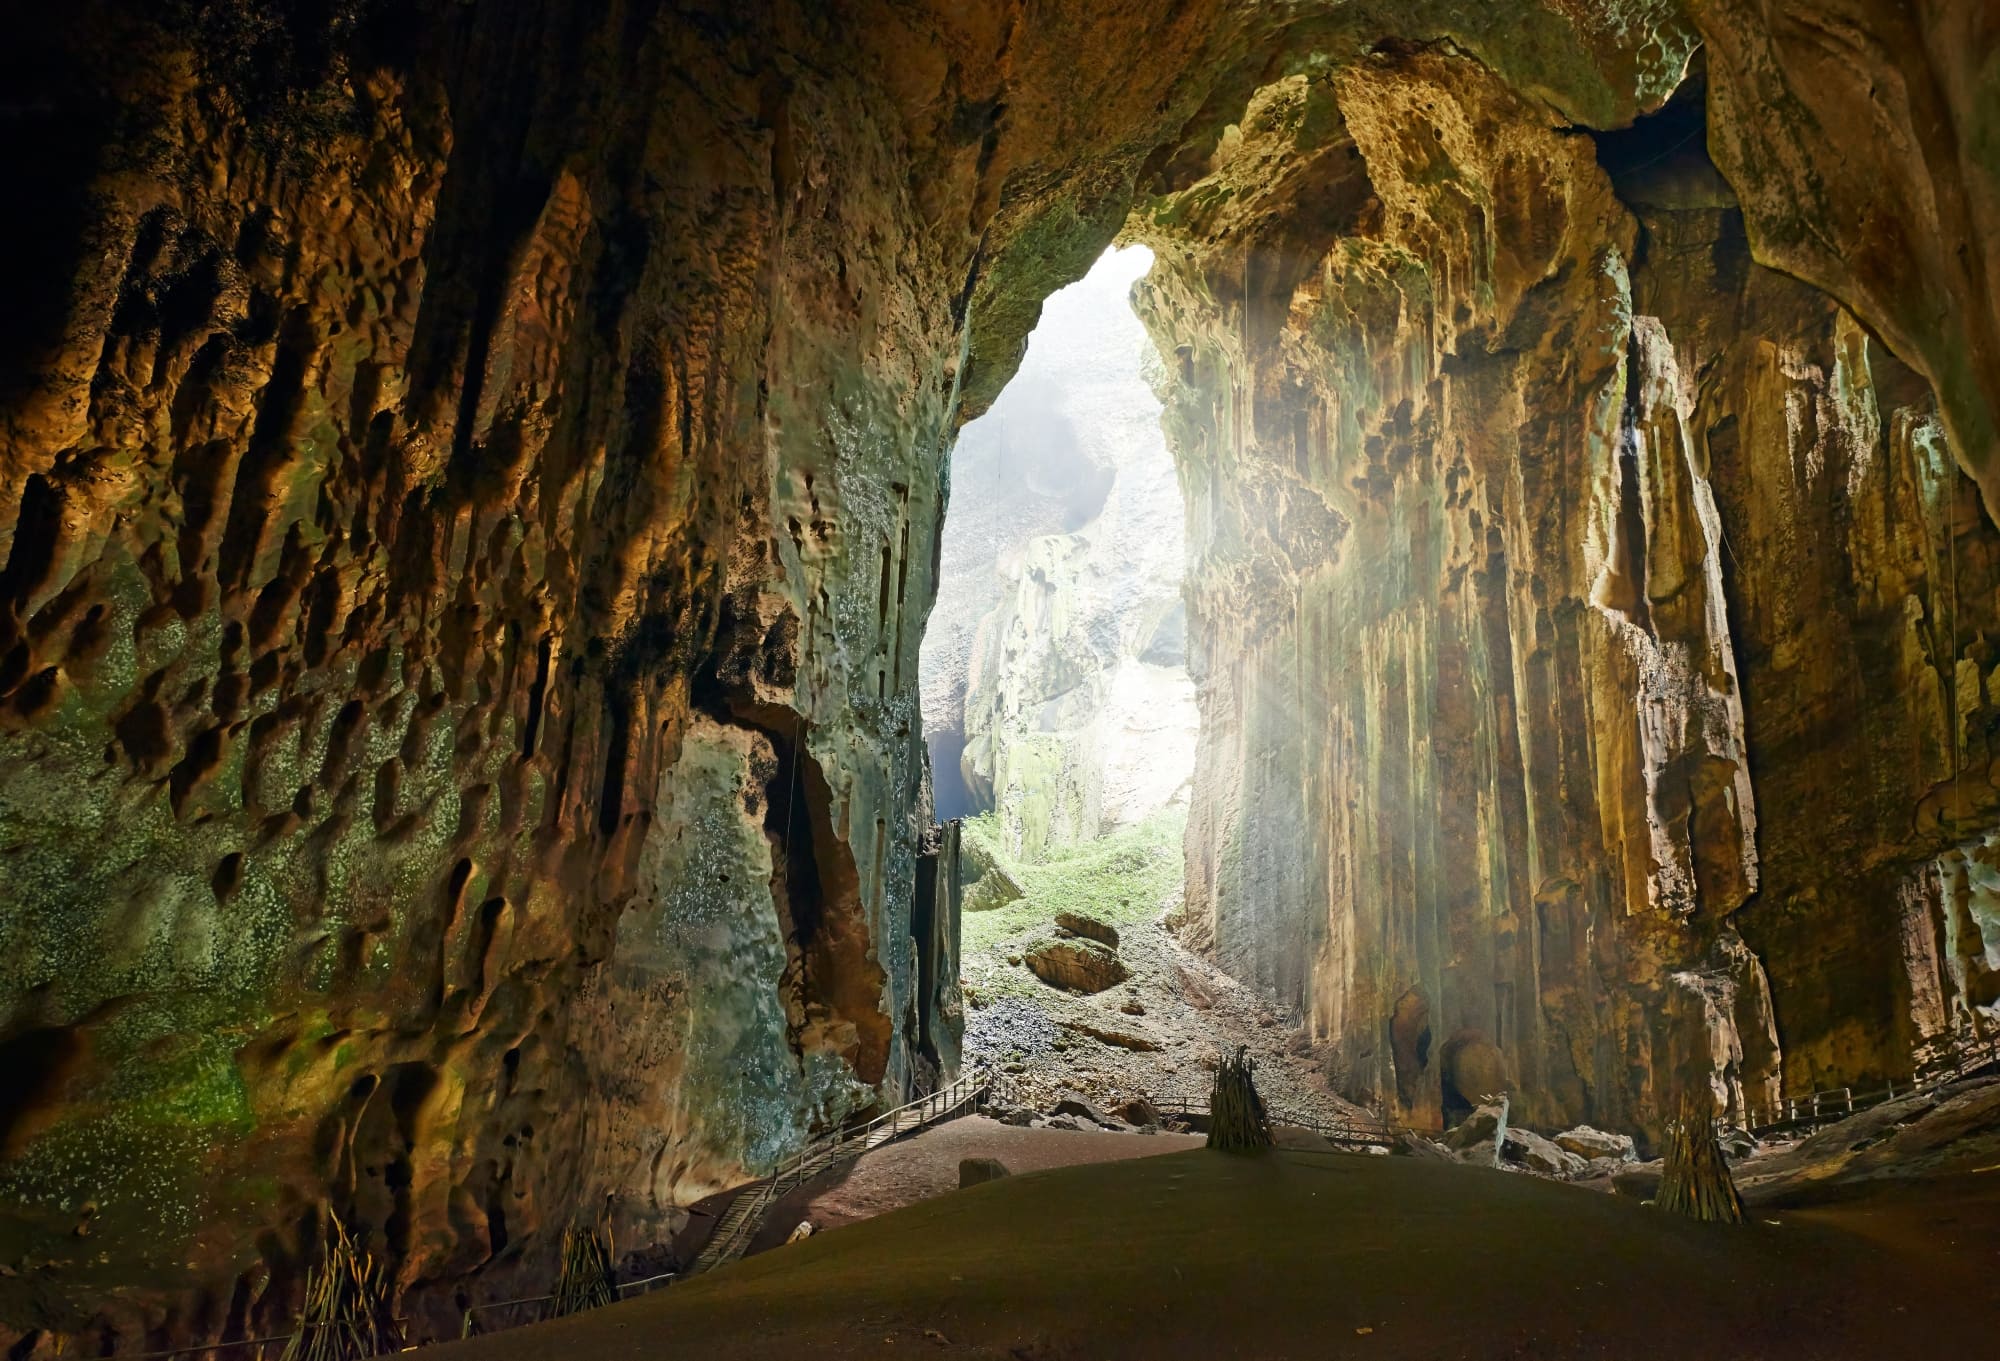 Large cave with high ceiling in Mulu National Park